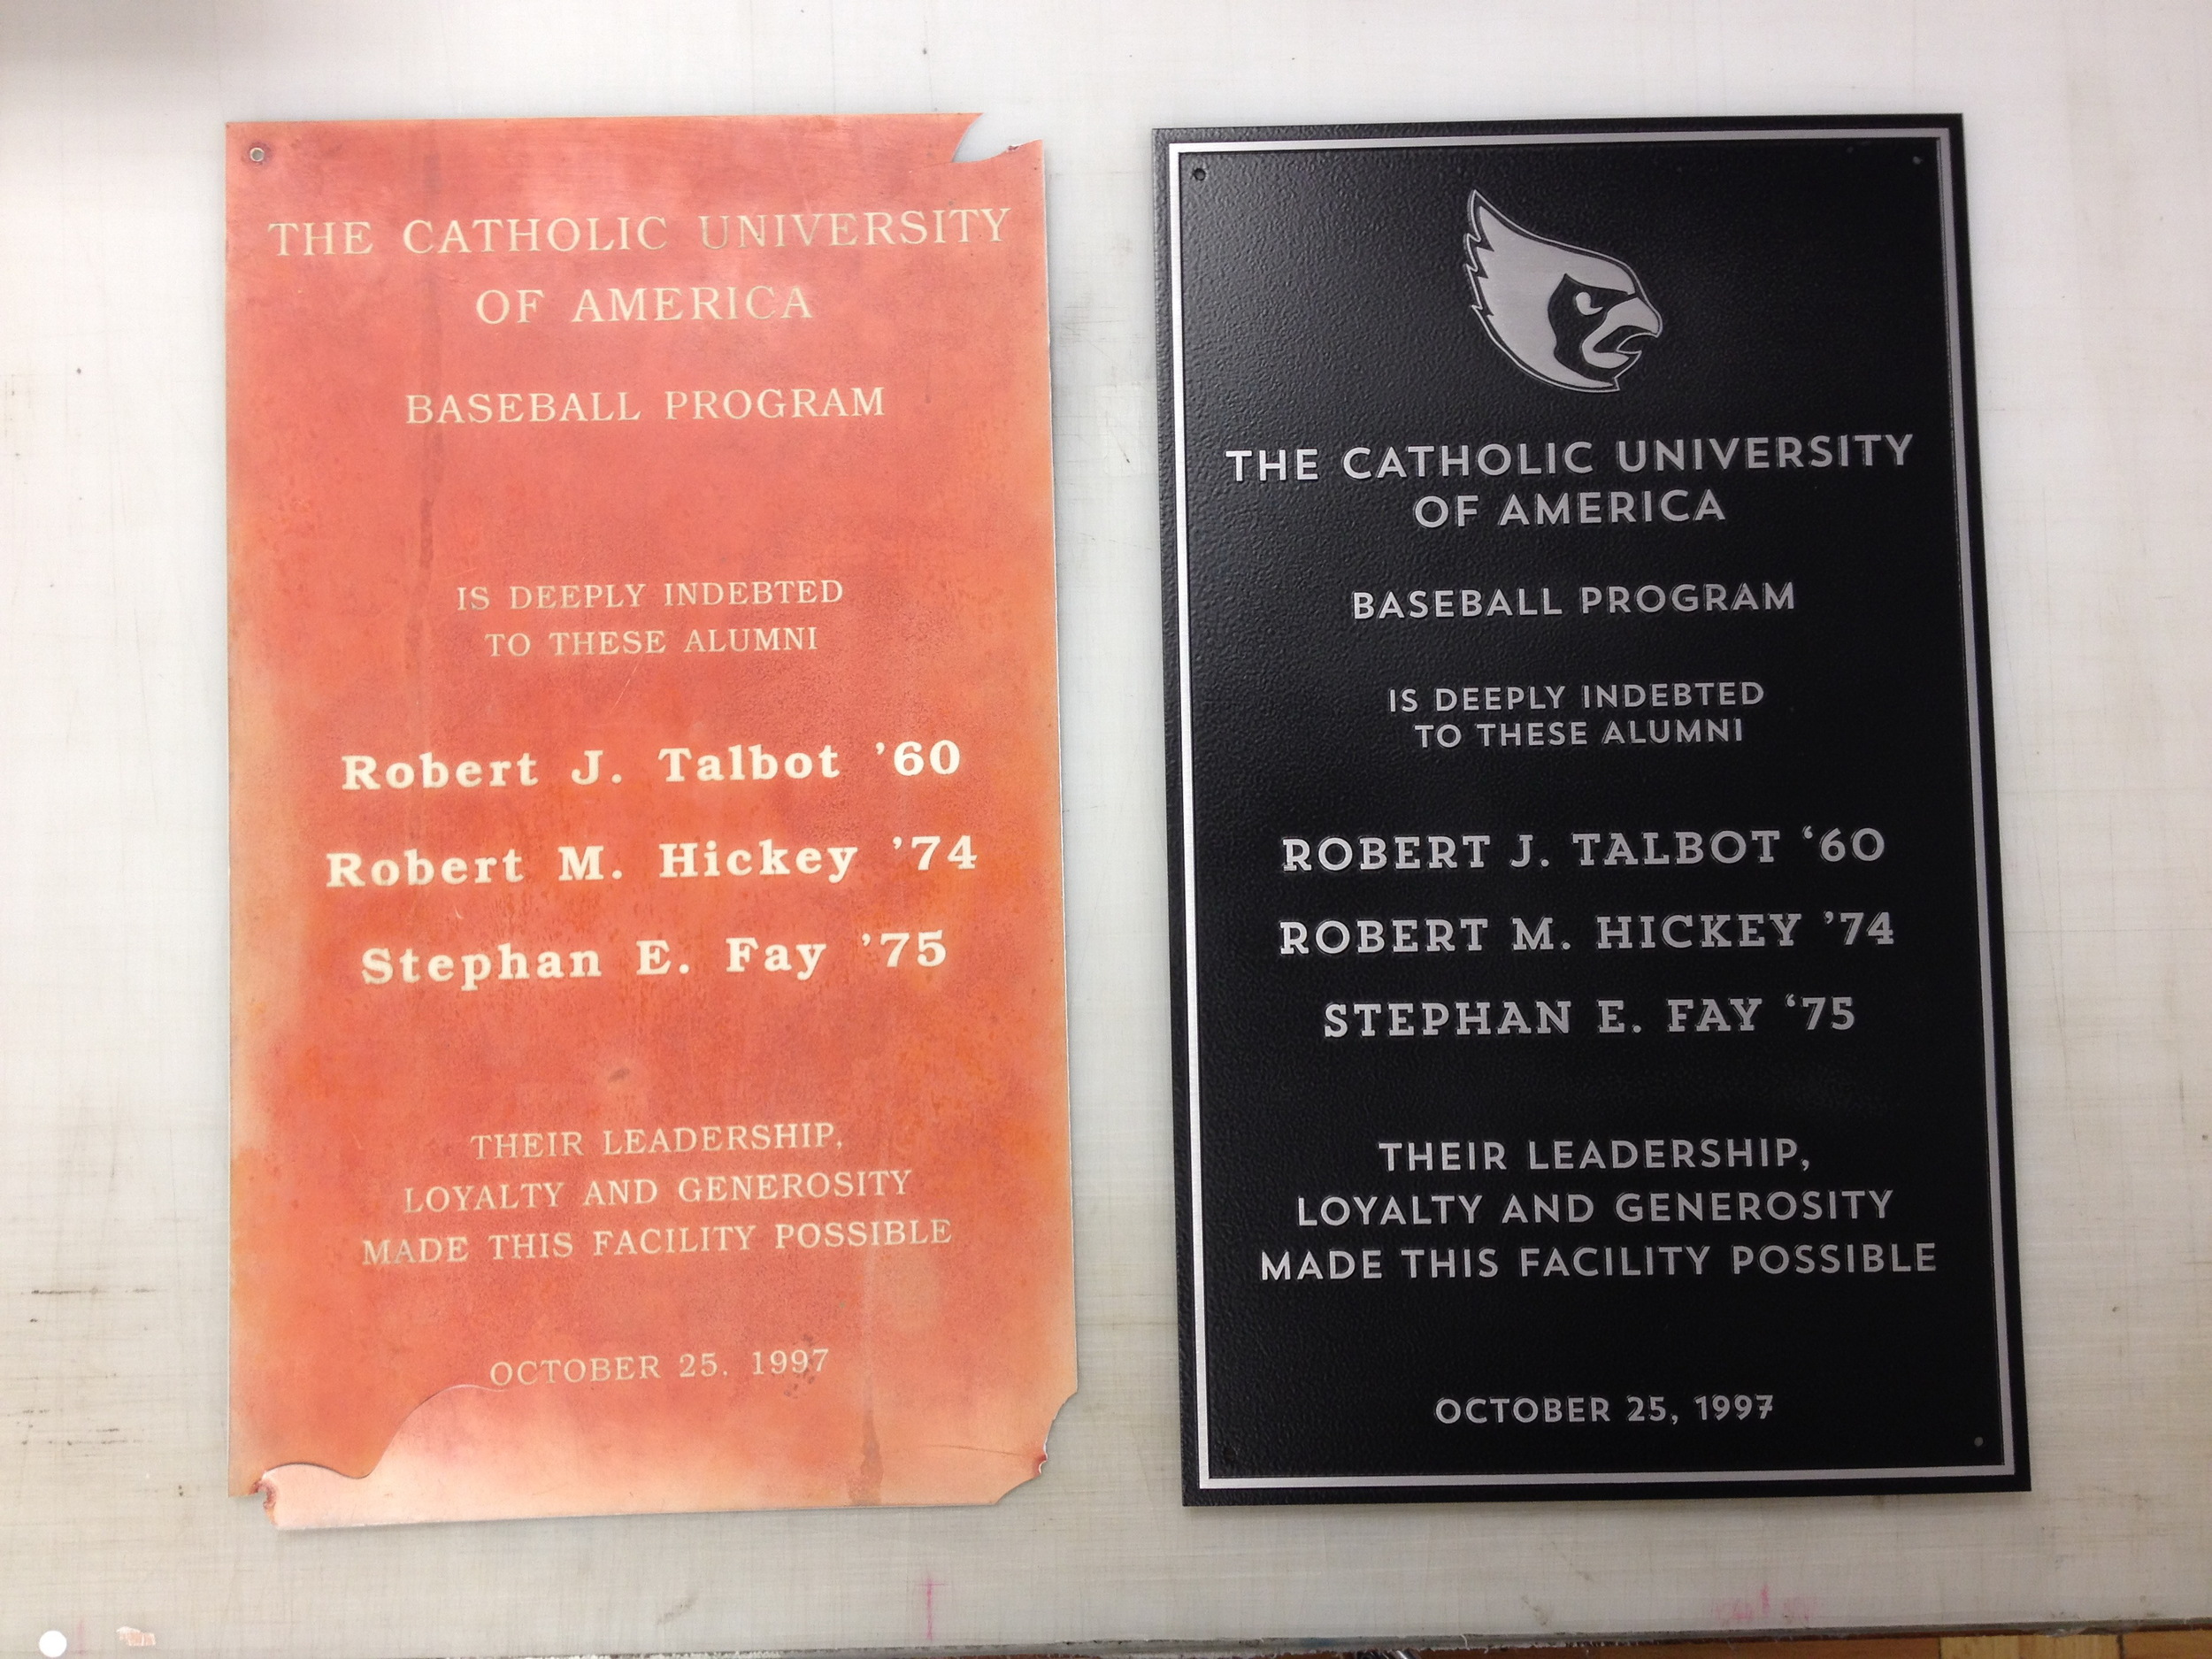 Before and after plaques for Catholic University